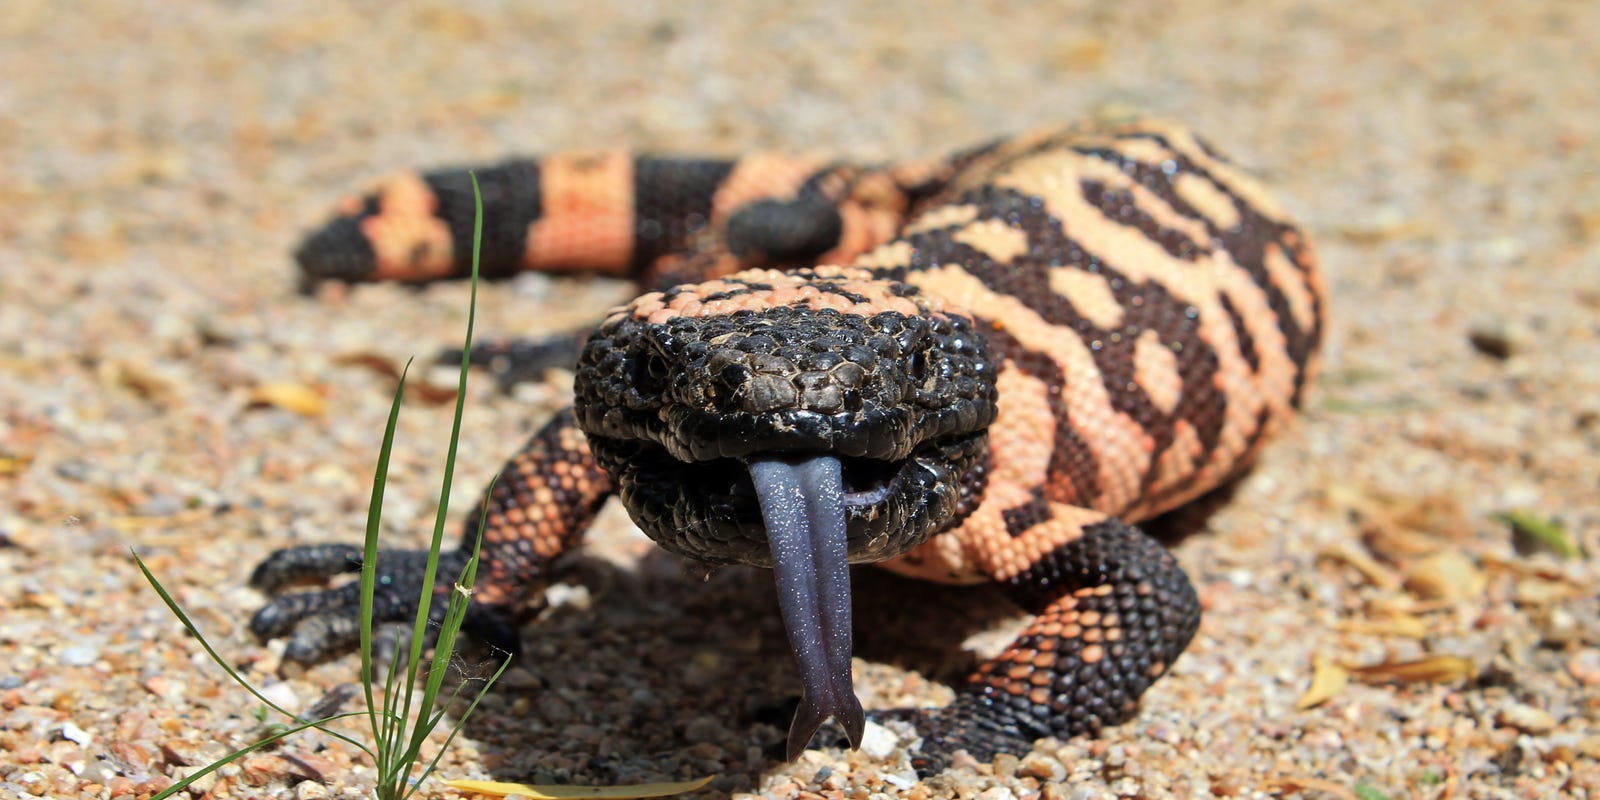 Scary things in Arizona: Scorpions, Gila monsters, wrong-way drivers